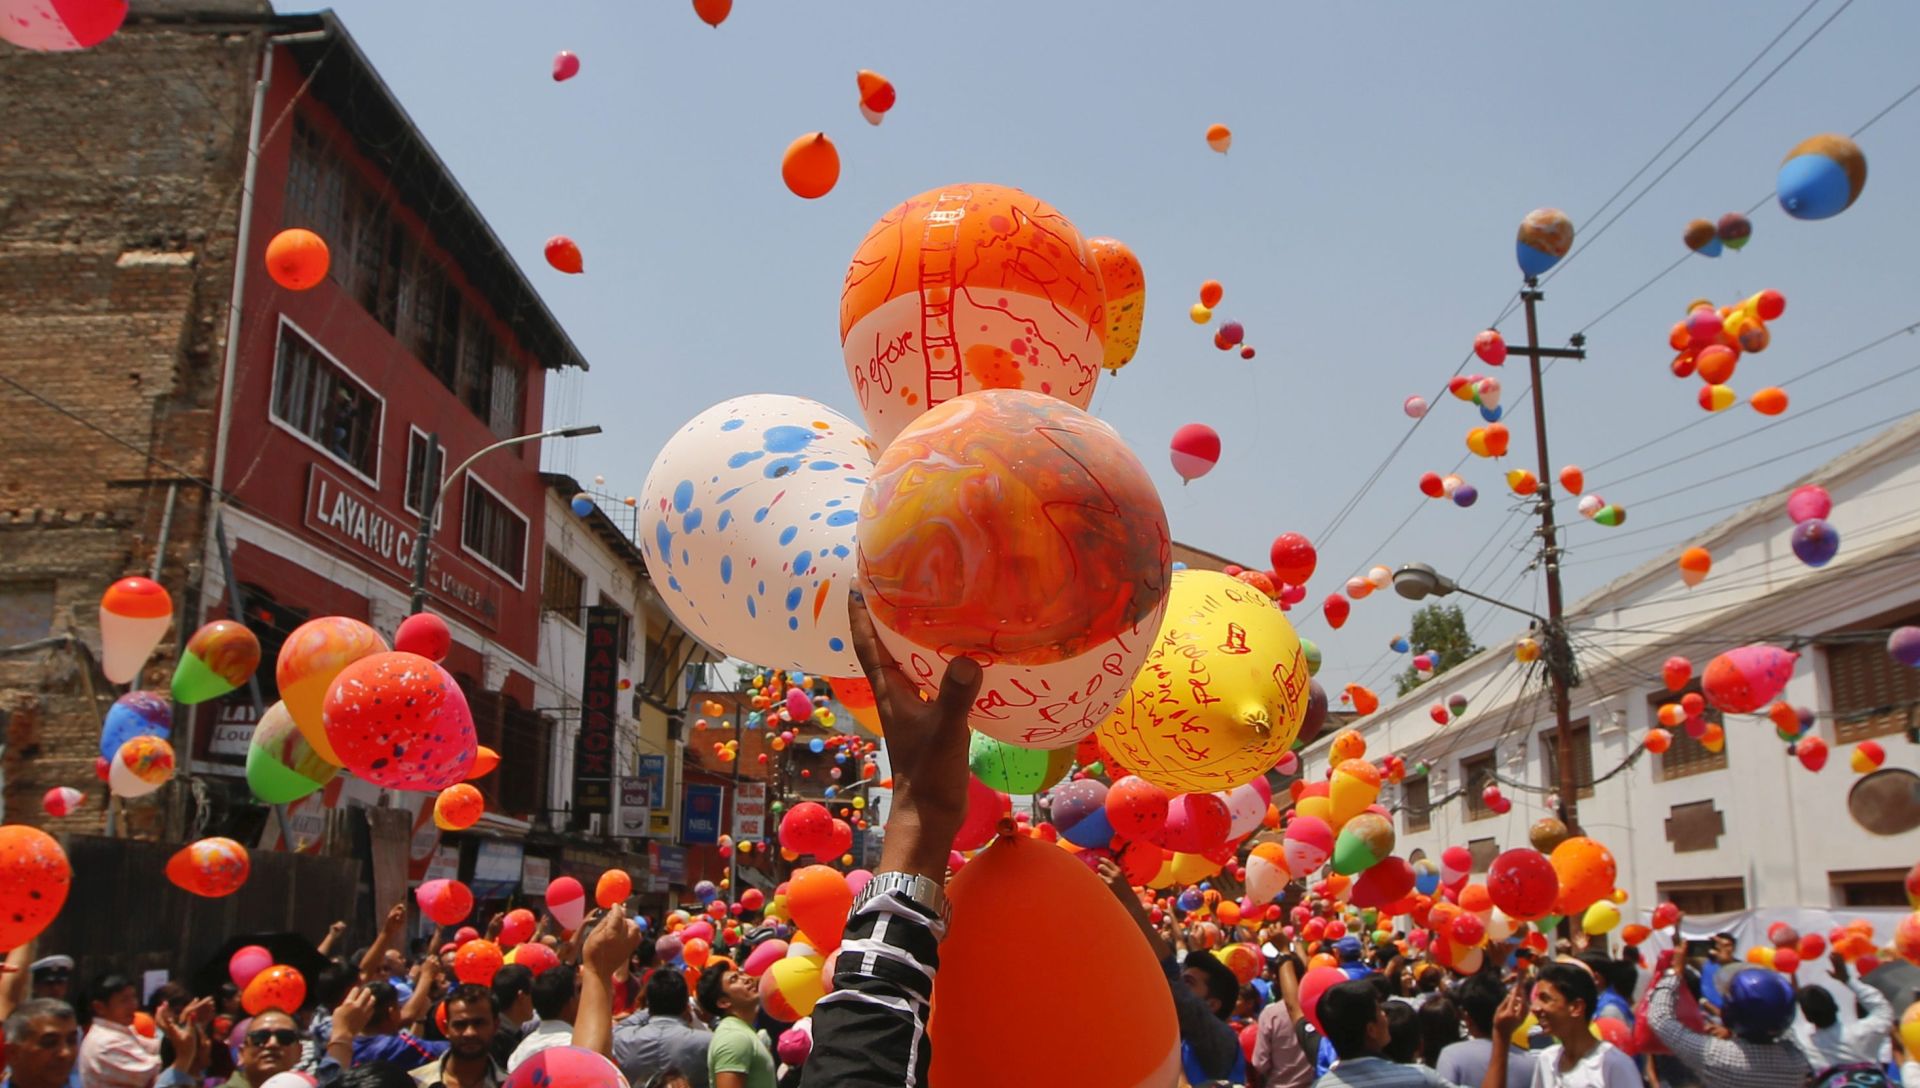 epa05273062 Nepalese people gather to release balloons at Kathmandu Durbar Square in memory of people who died in the earthquake a year ago, in Kathmandu, Nepal, 23 April 2016. Thousands of Nepalese gathered at Kathmandu Durbar Square, which was damaged during the earthquake, in remembrance of the victims of the quake that left nearly 9,000 people dead on 25 April 2015.  EPA/NARENDRA SHRESTHA